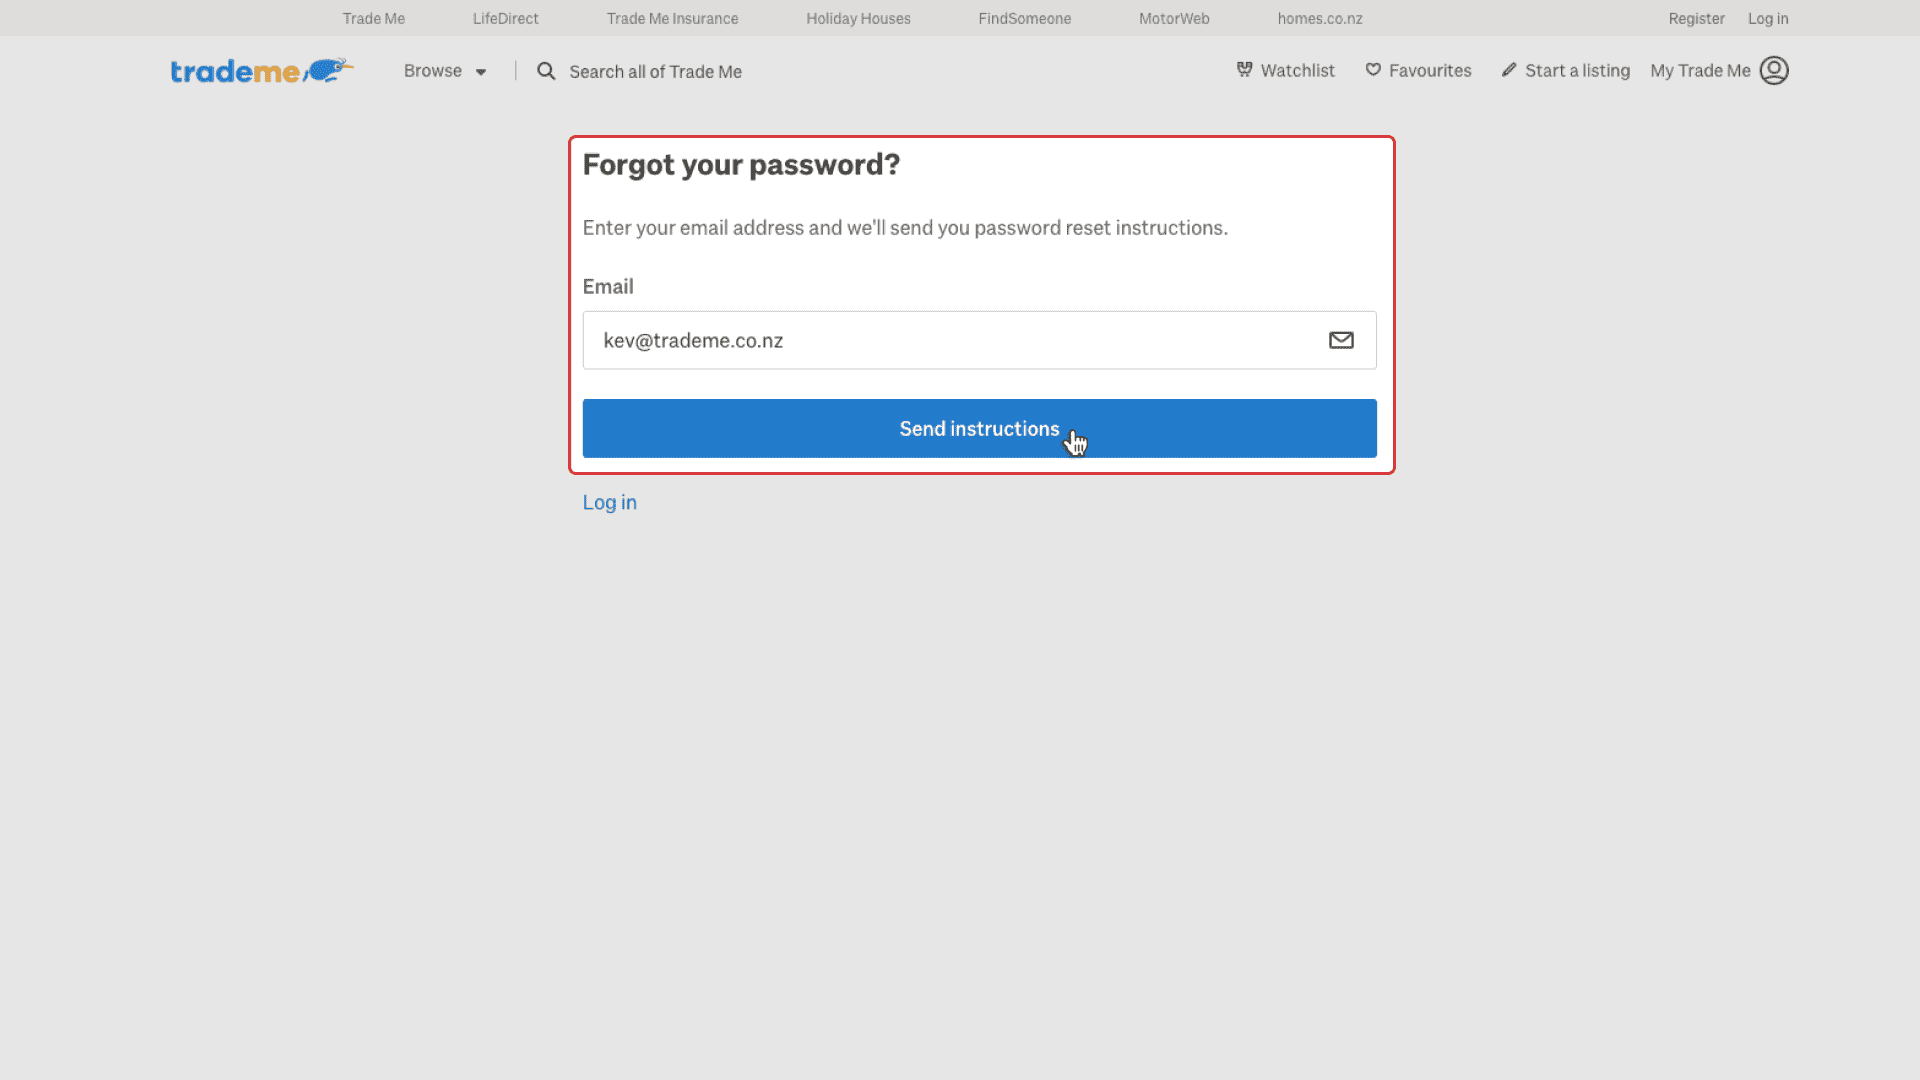 On the page titled 'Forgot your password?', enter your email address in the text field labelled 'Email'. The 'Send instructions' button is directly below this. You can also select 'Enter' or 'Return' on your keyboard to submit.